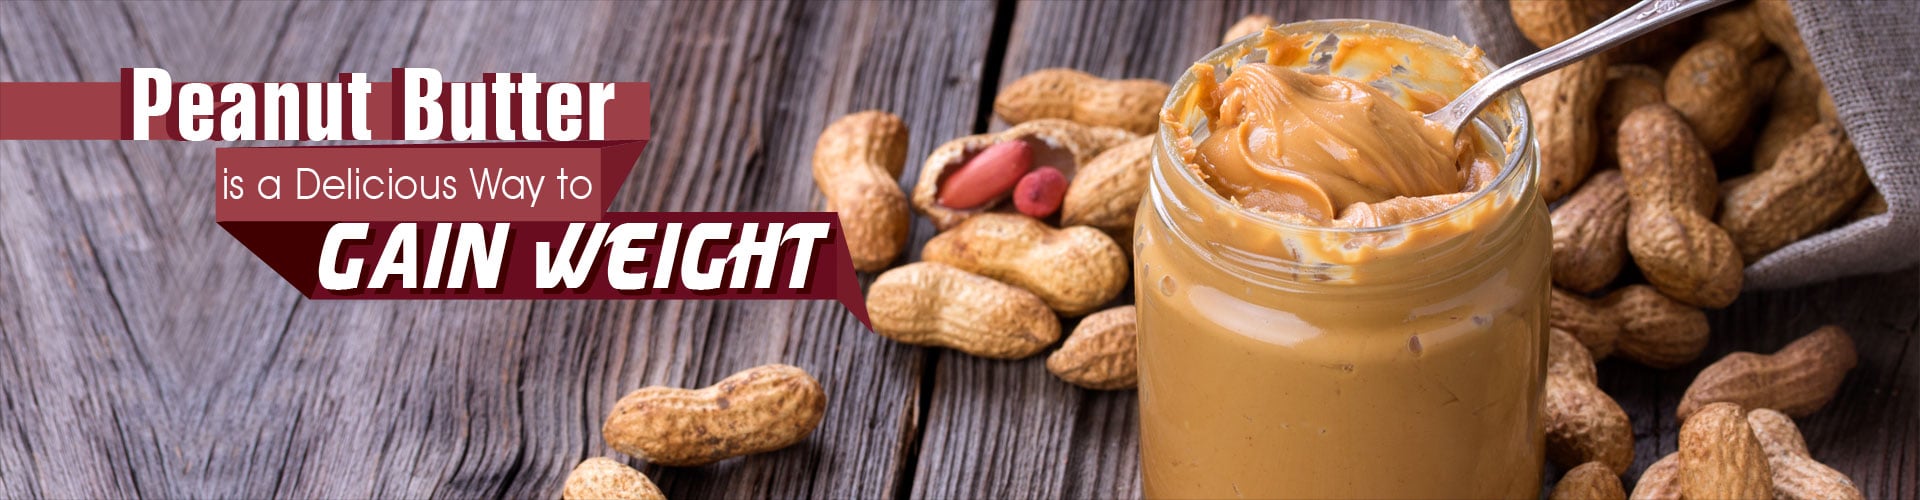 Peanut Butter is a Delicious Way to Gain Weight